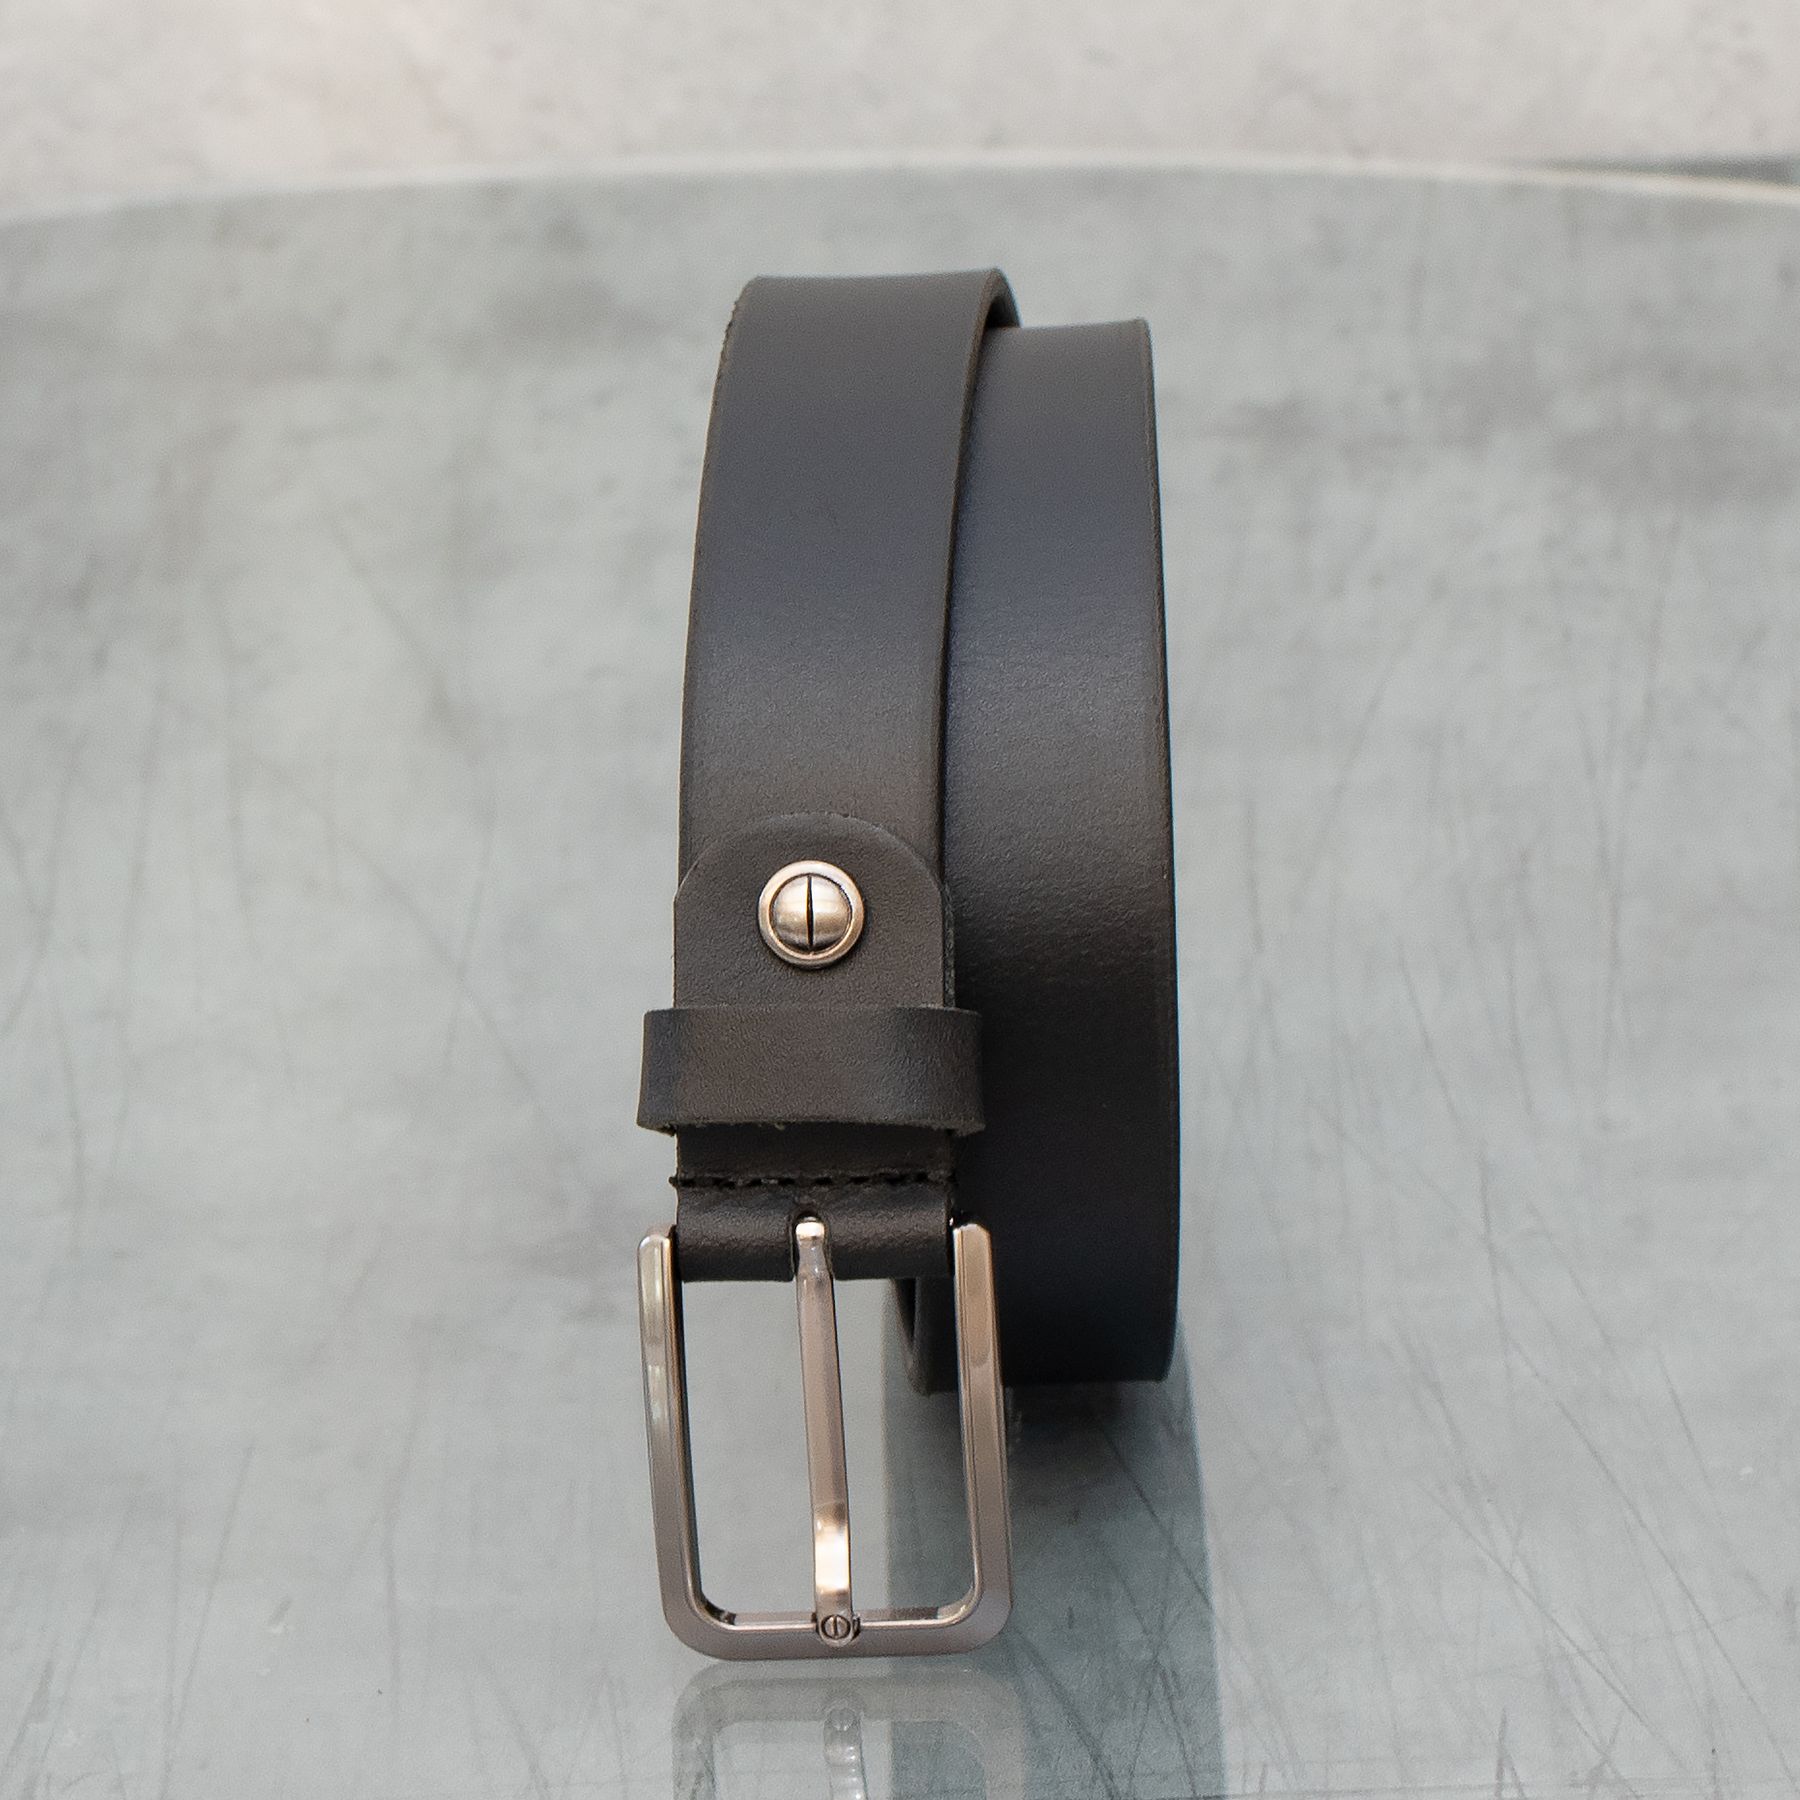 New Black Leather Belt Mens Luxury Oiled Narrow Leather Belt by Prime Hide